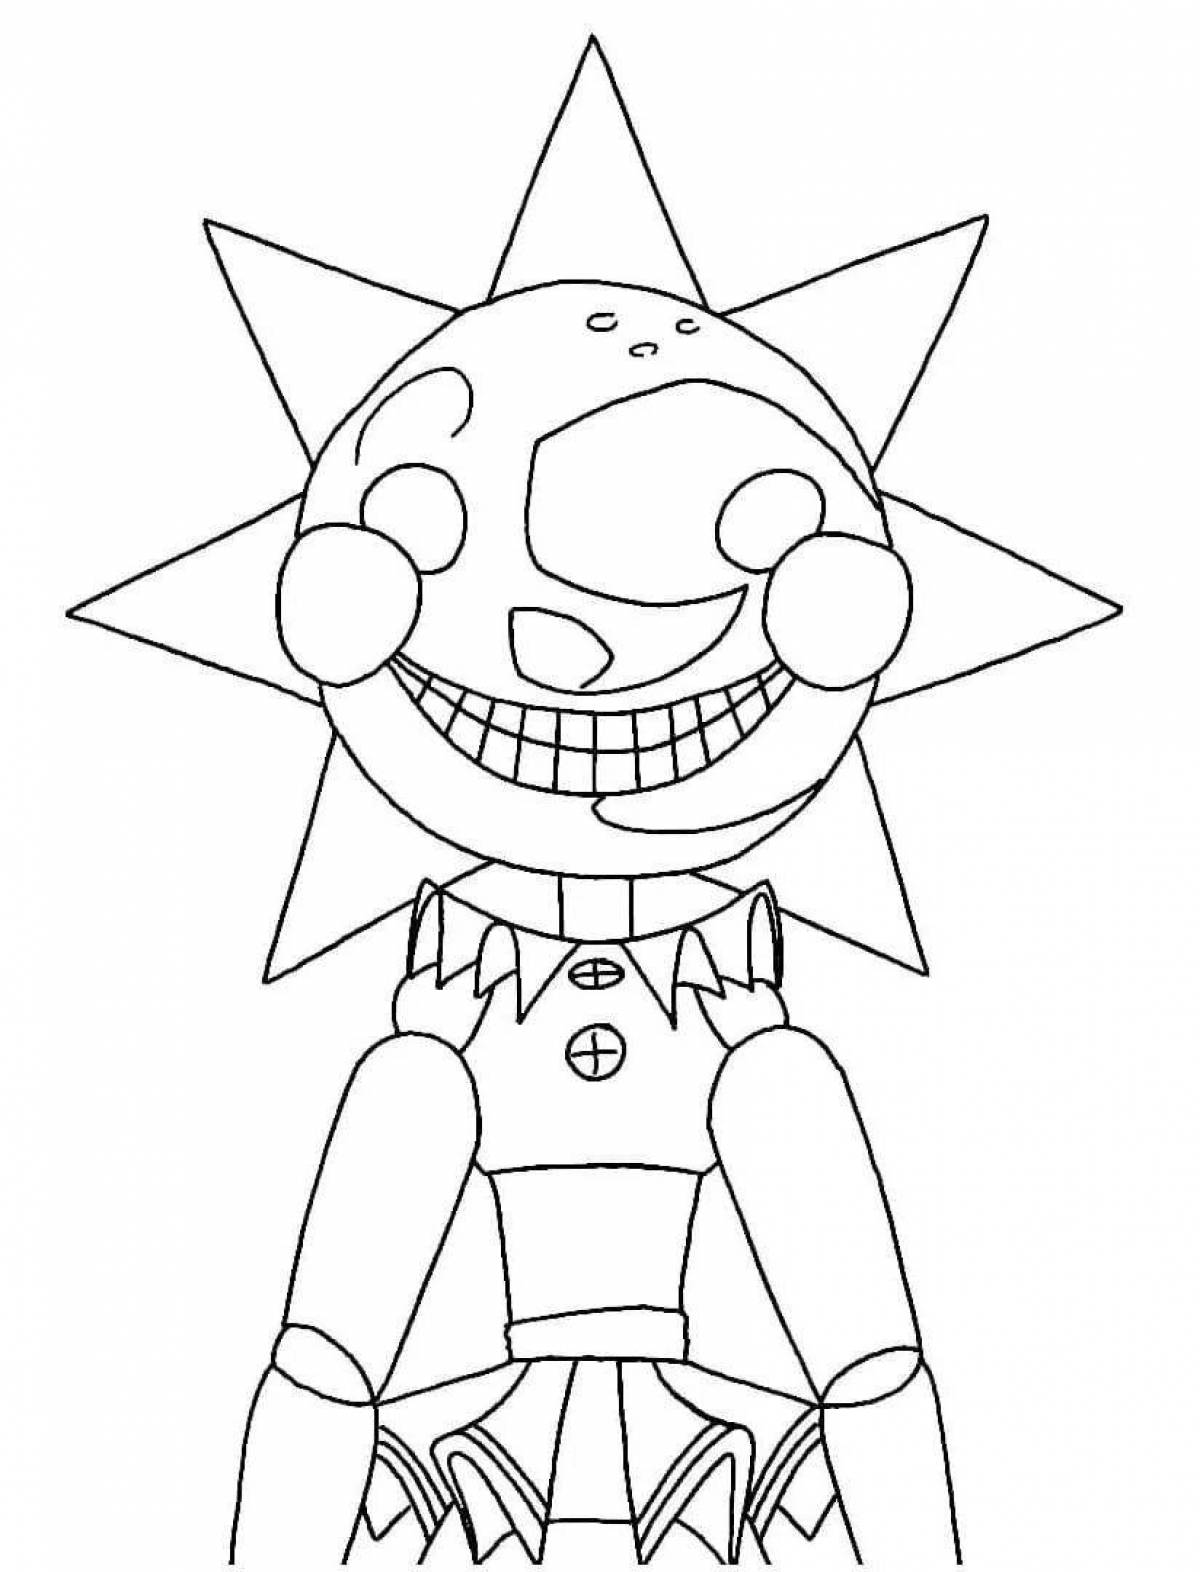 Vivacious fnaf official coloring page